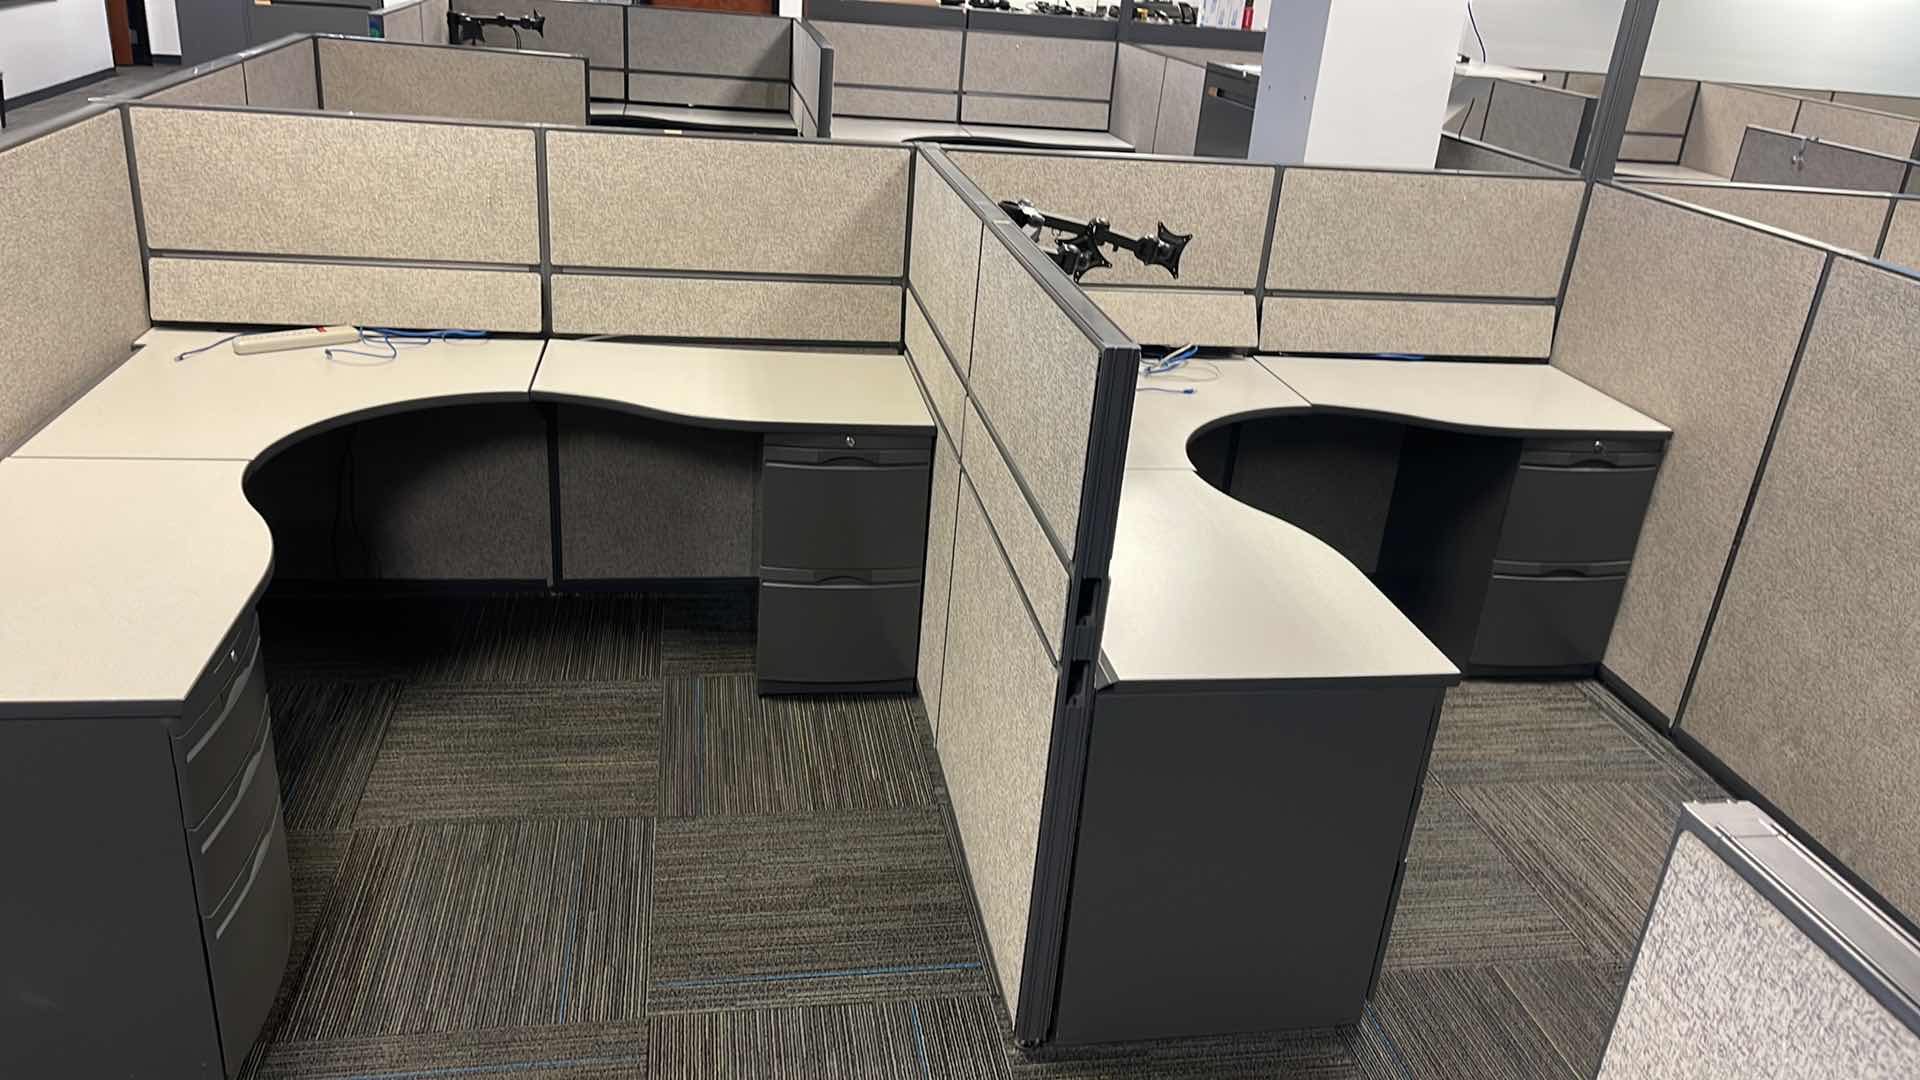 Photo 5 of 3 PC CUBICLE SET W 5 DRAWER MEDAL BASE DESKS 2 CUBICLES 76” X 76” H50” 1 CUBICLE 12’ X 76” H50”(BUYER TO DISASSEMBLE & REMOVE FROM 2ND STORY OFFICE BUILDING W ELEVATOR)